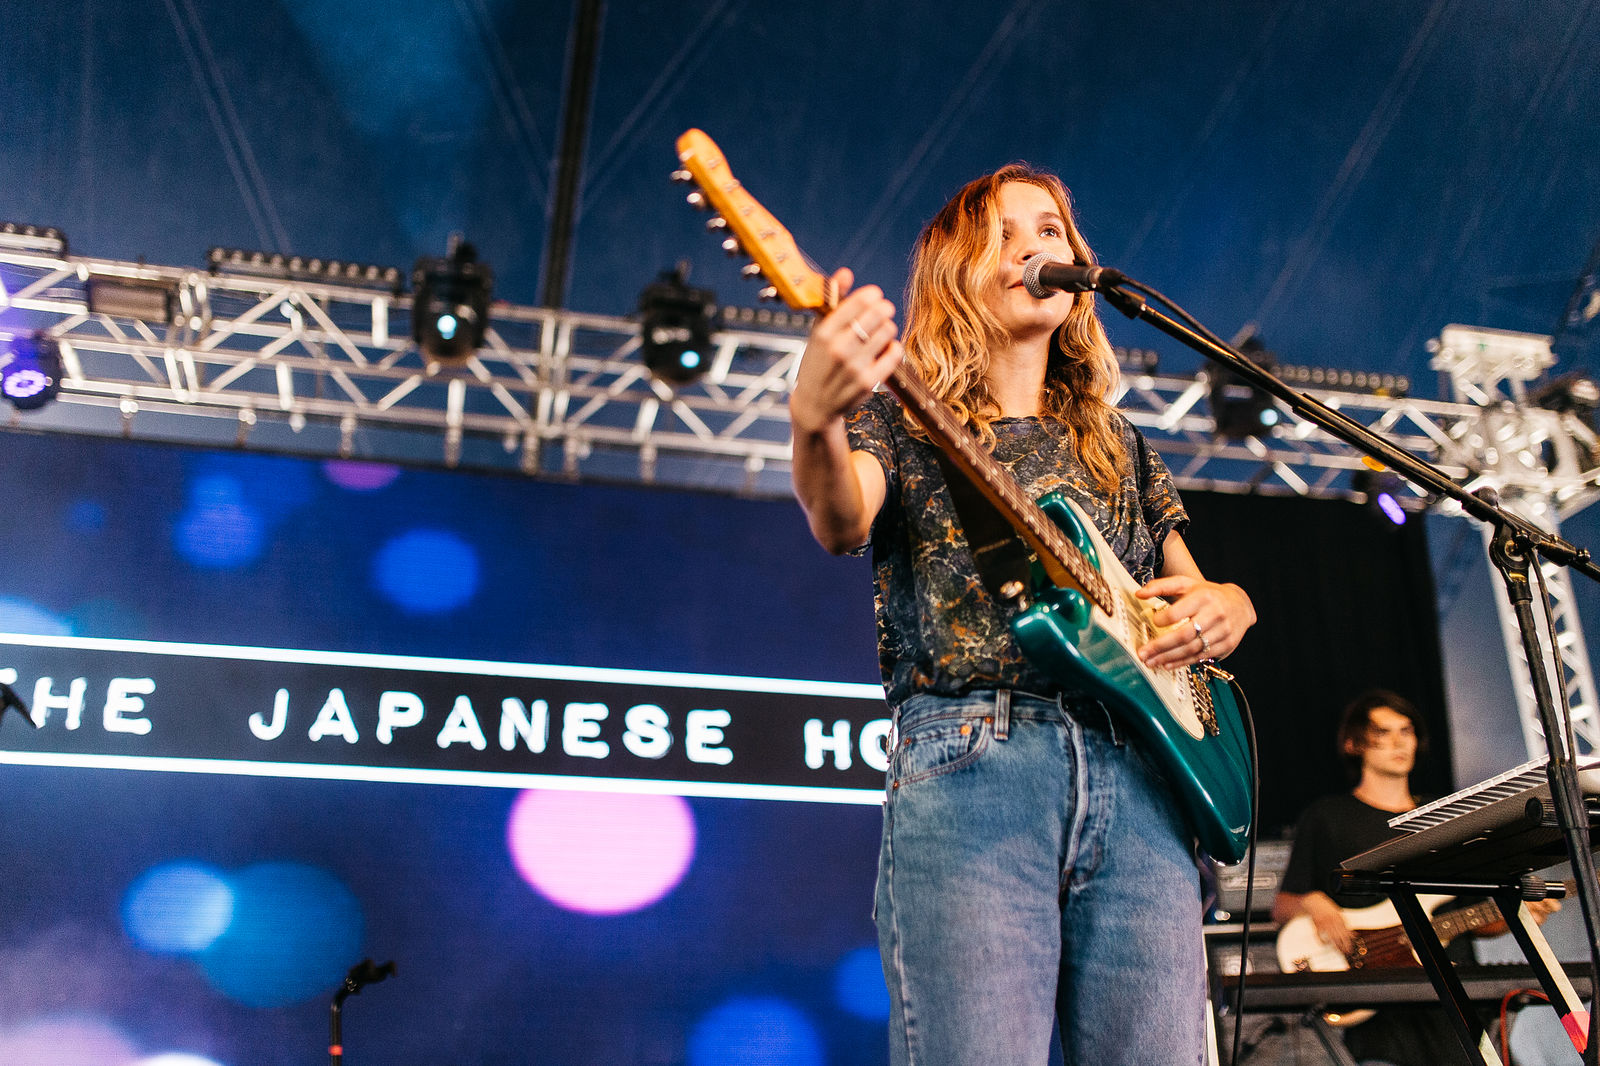 The Japanese House